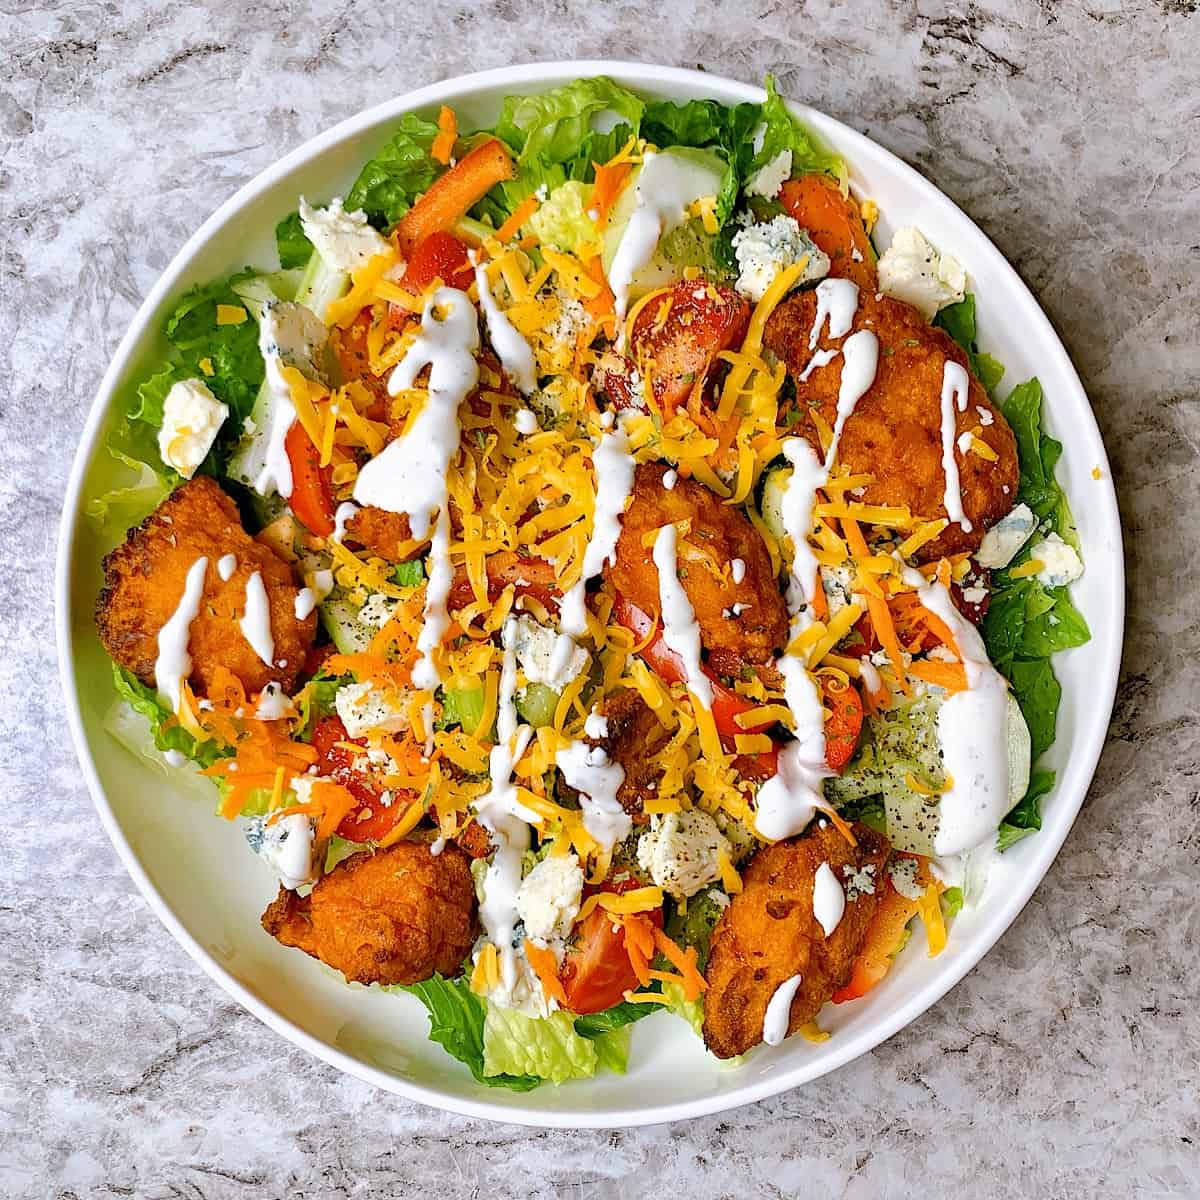 Buffalo chicken salad with buttermilk ranch drizzled on top